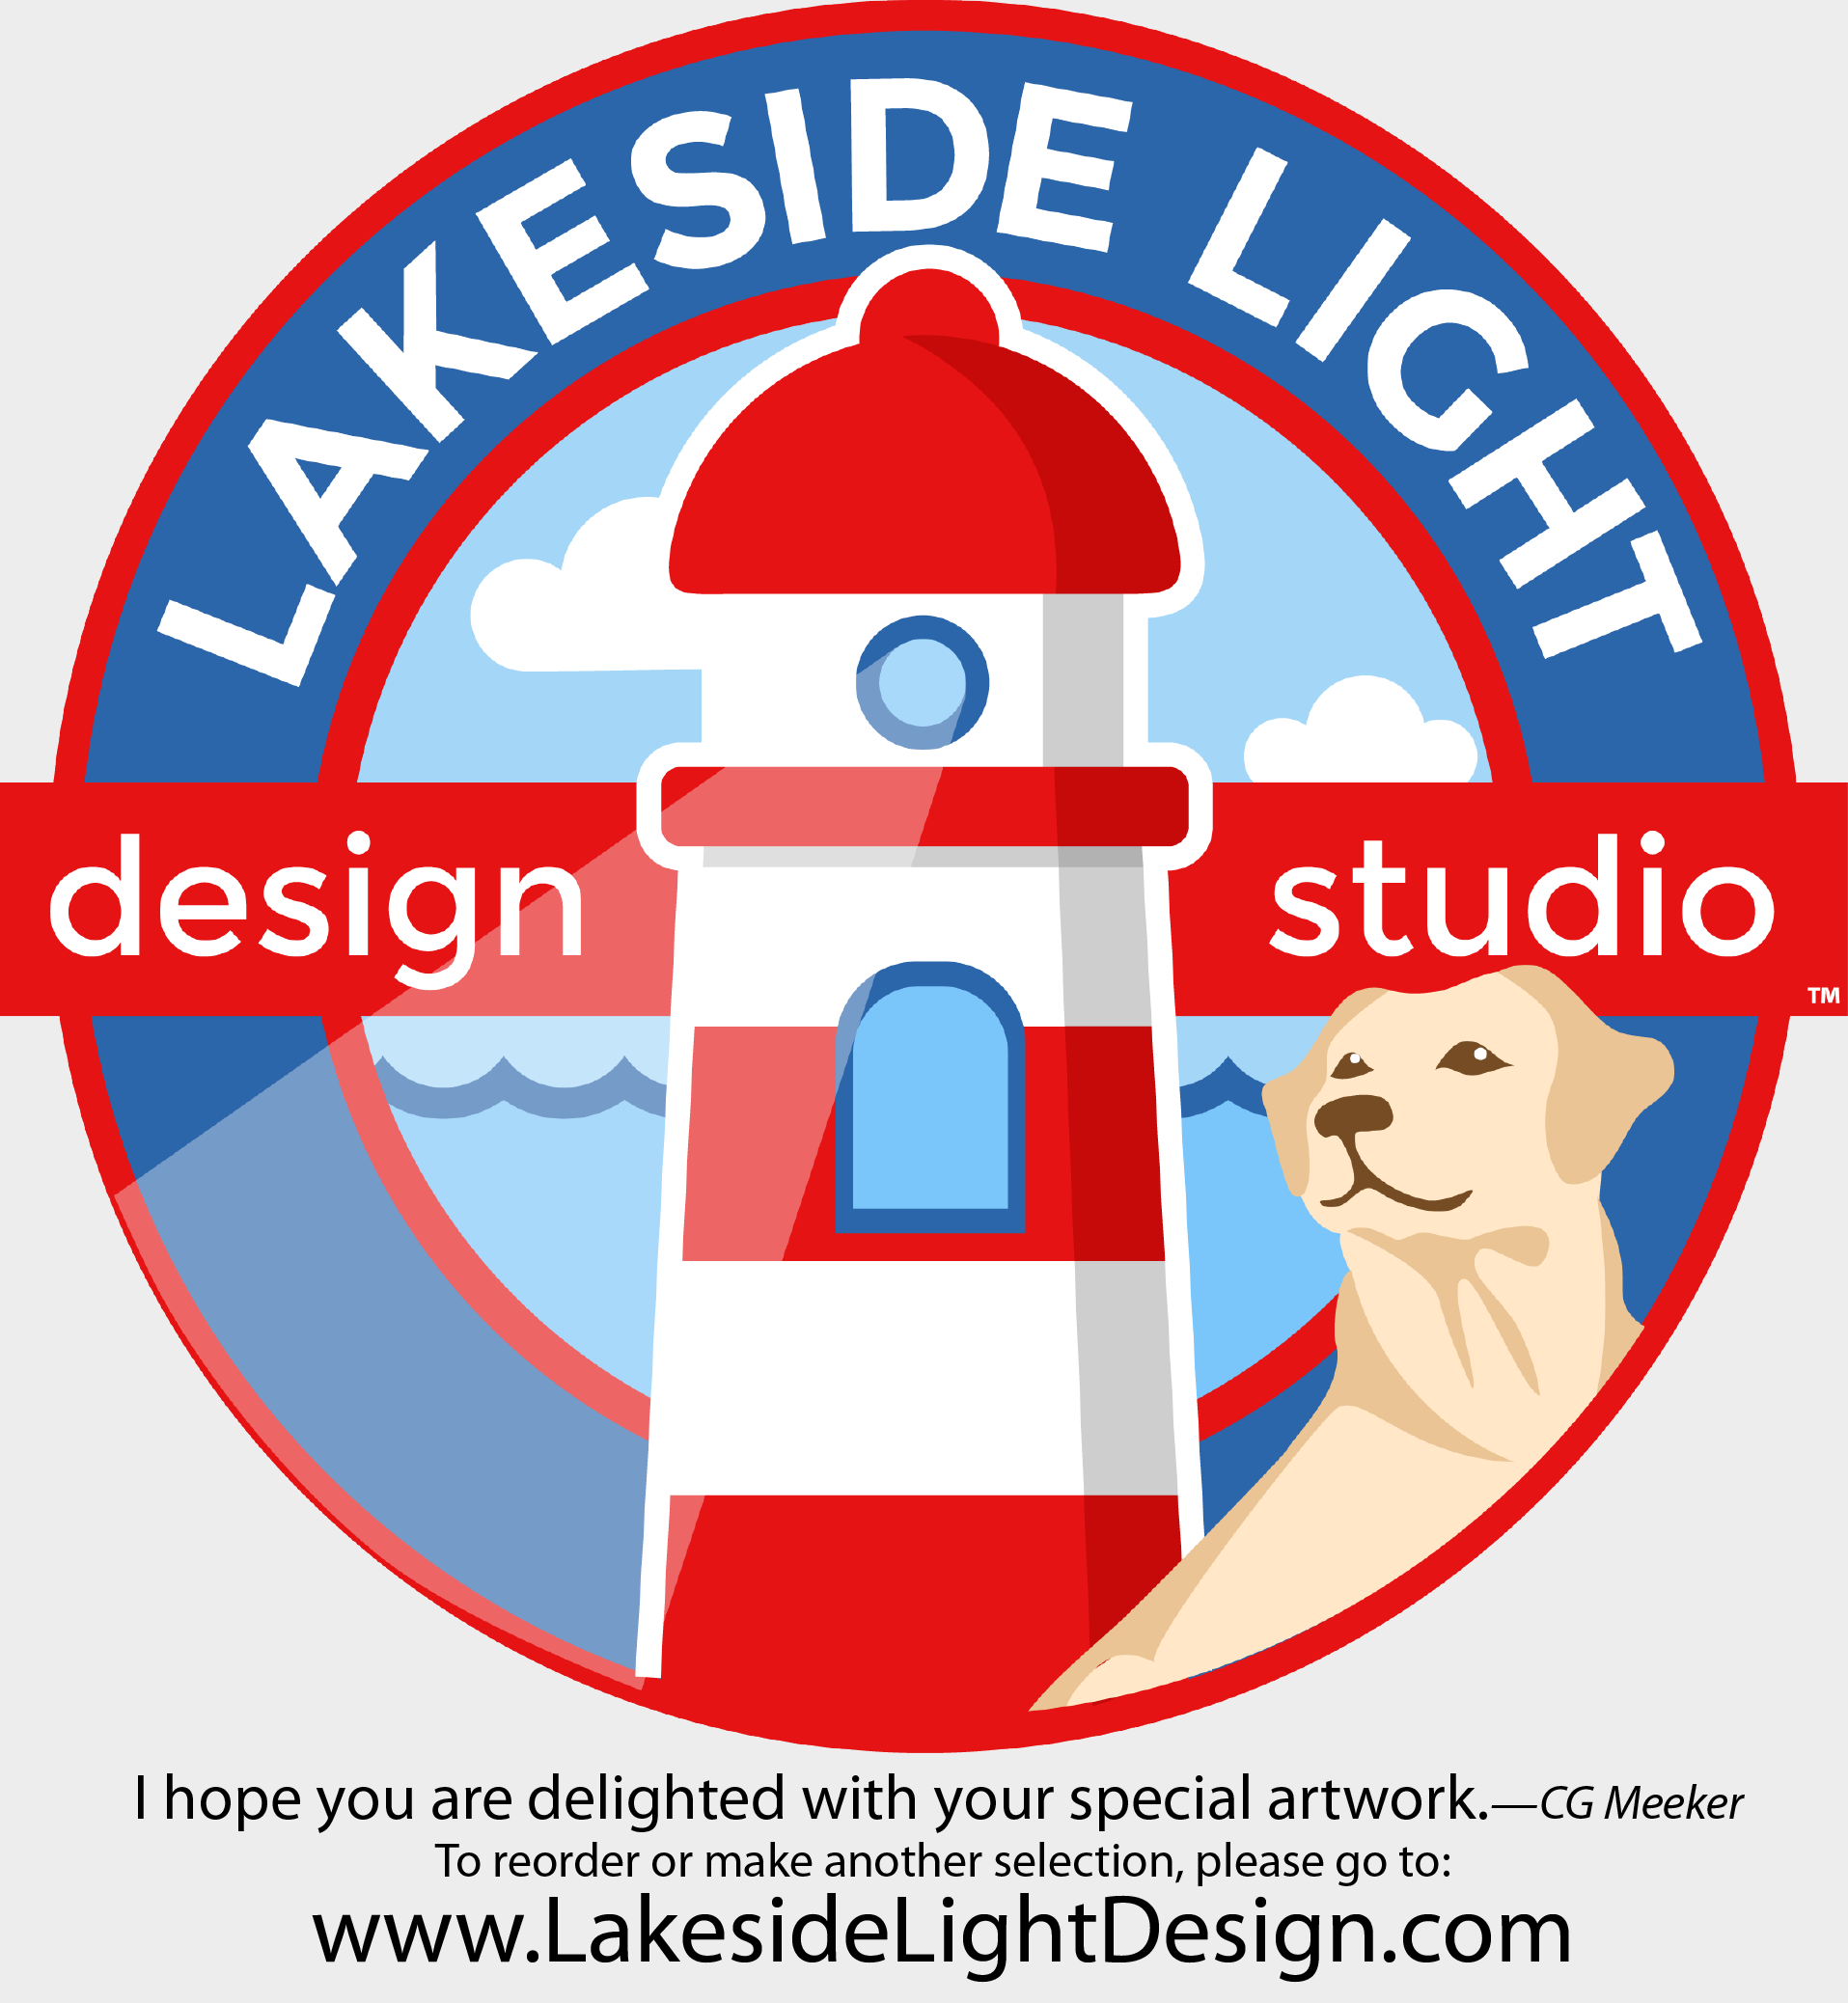 LakesideLightDesignReorder Information made with sublimation printing